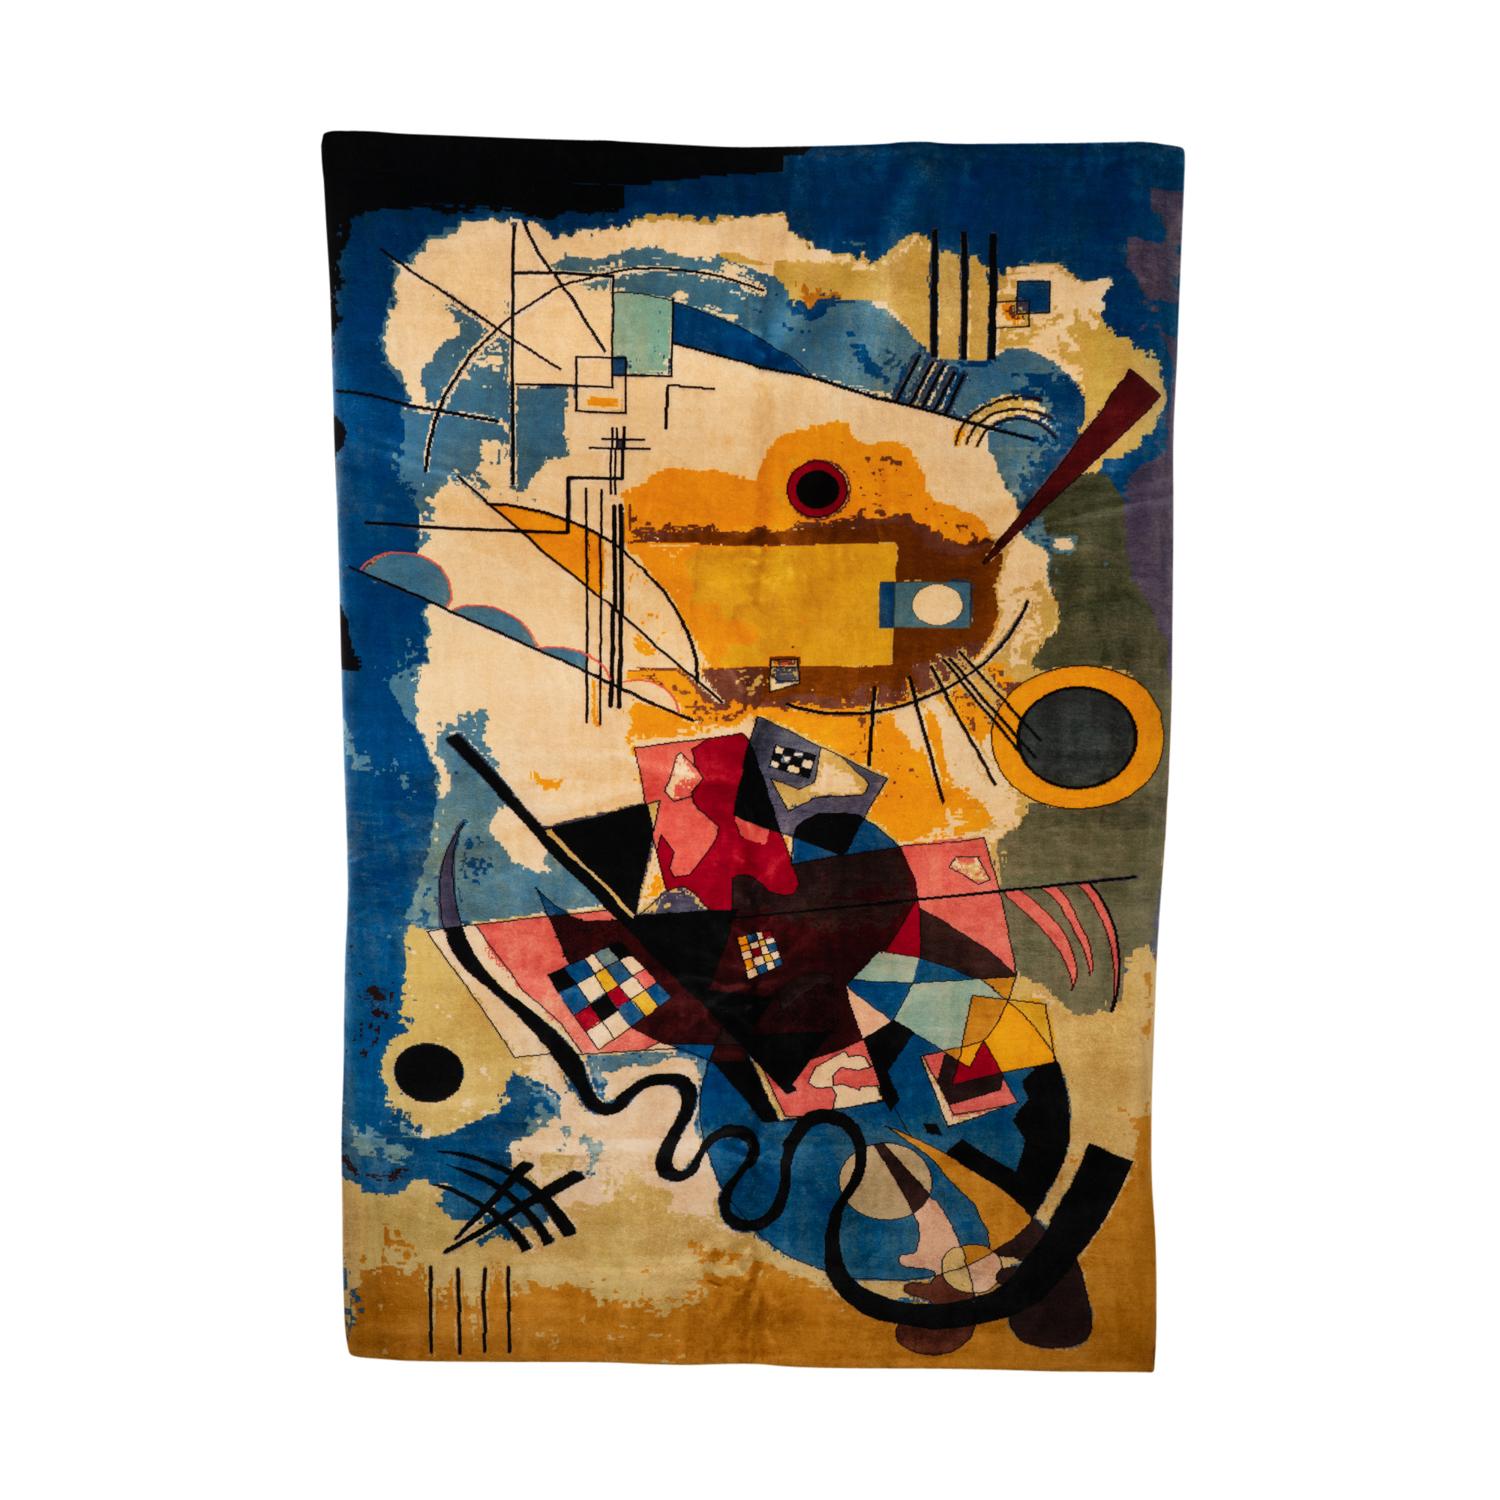 Rug, or tapestry, inspired by Wassily Kandinsky, abstract and in shades of blue and yellow. Hand-knotted in Merino wool.

Contemporary craftsmanship.

Numbered 1/8. Surface area: 6 M2. Density: 840,000 knots.

Delivered with a certificate signed by